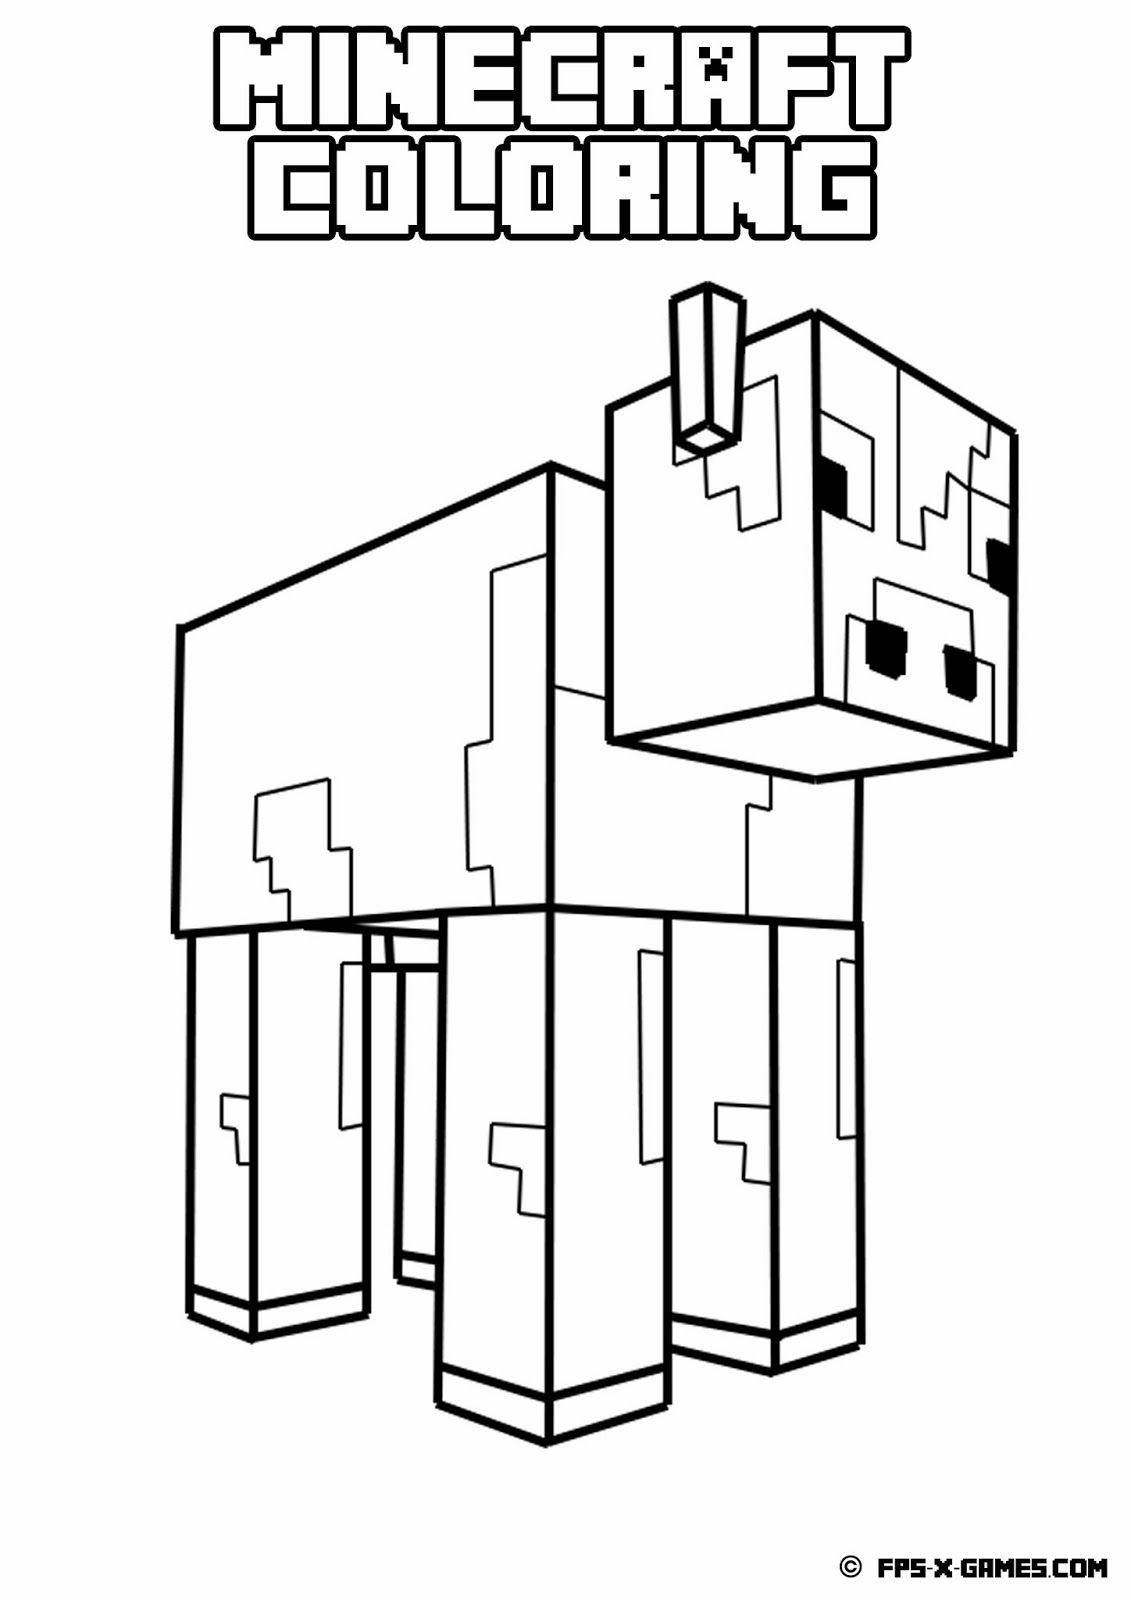 Printable Minecraft Coloring Page | Minecraft Coloring | Pinterest - Free Printable Minecraft Activity Pages